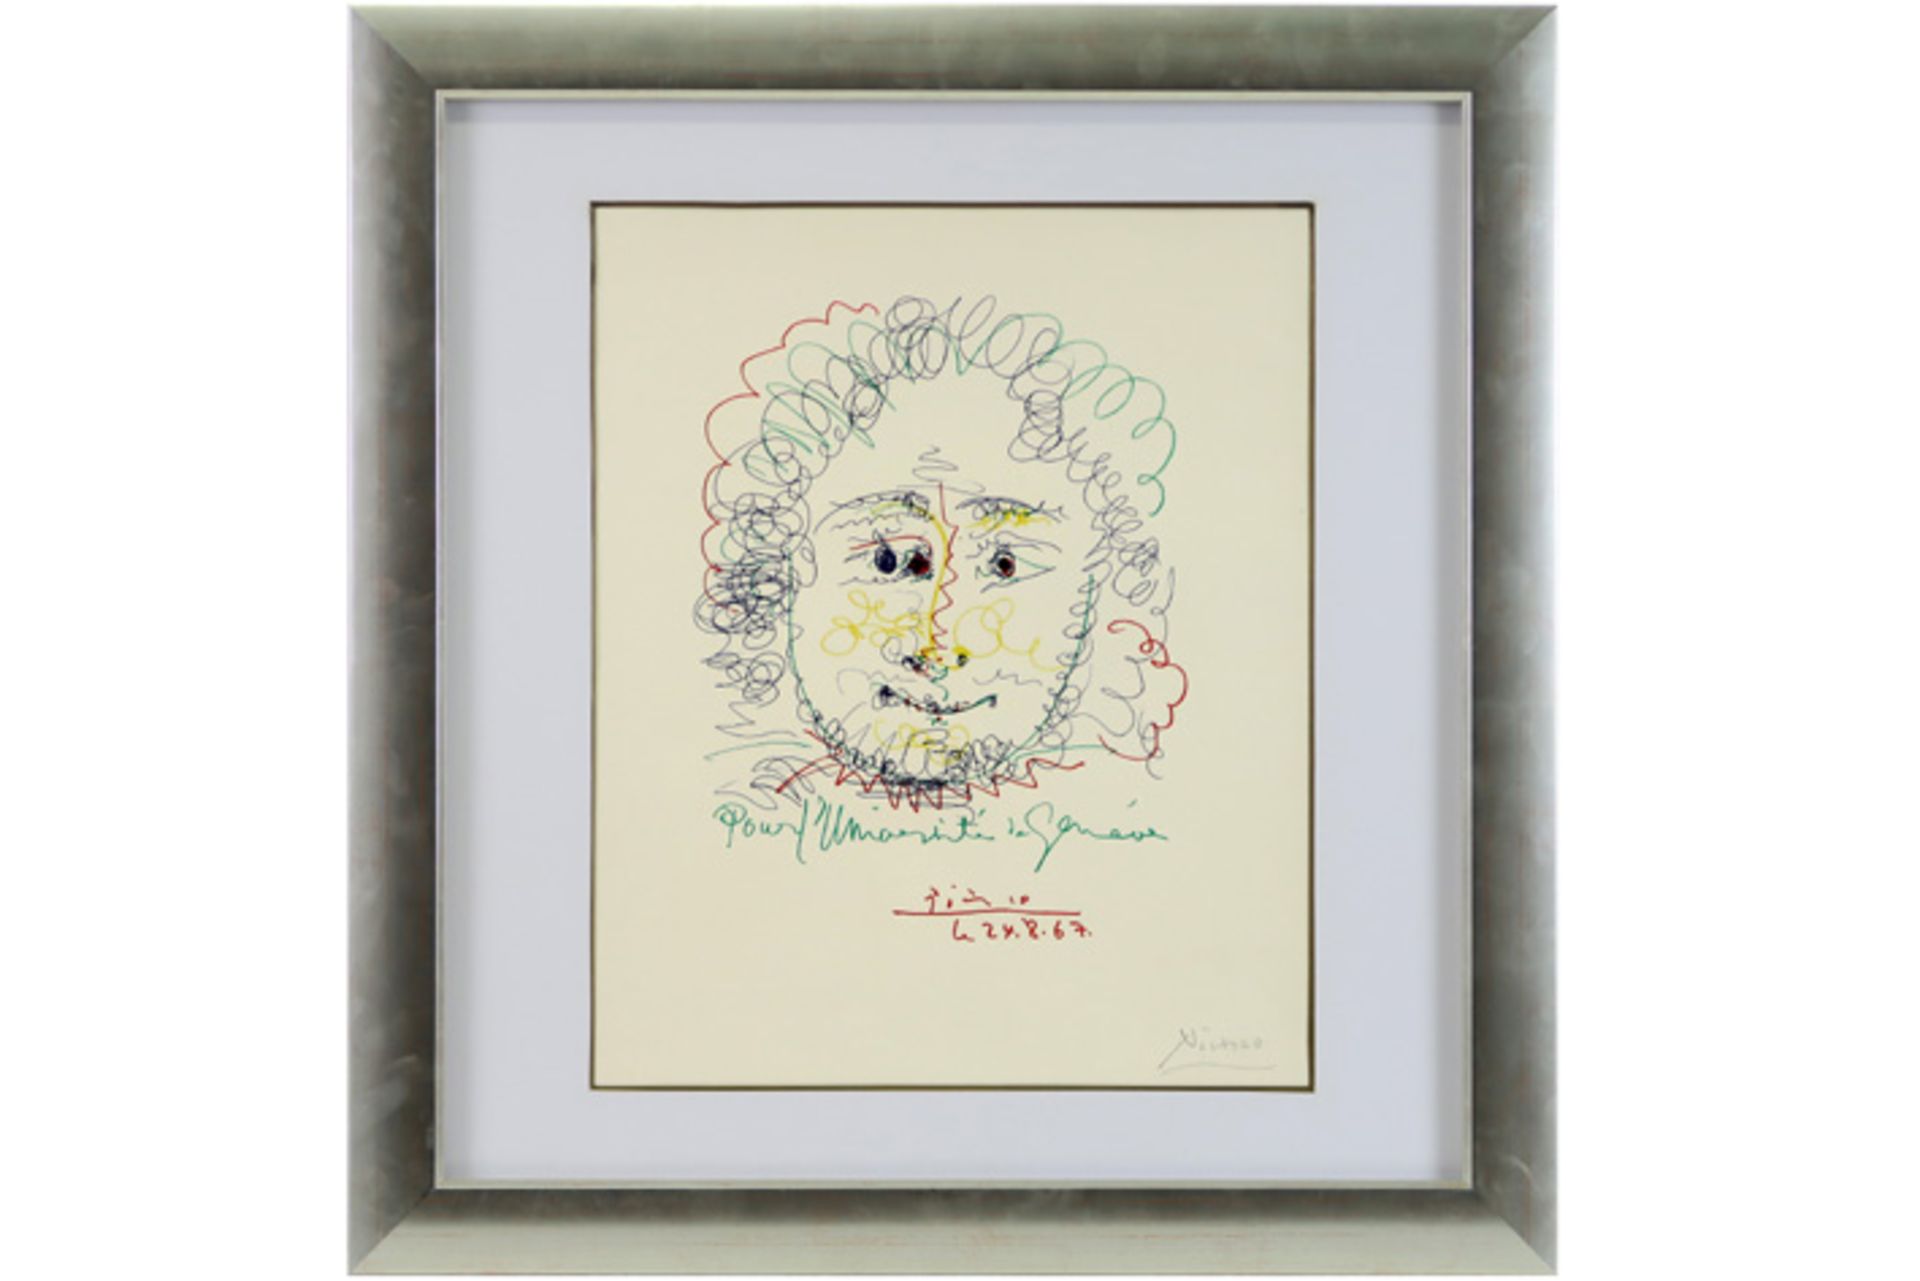 Pablo Picasso lithograph printed in colors - signed and in the print signed and dated 1967 PICASSO - Image 3 of 3